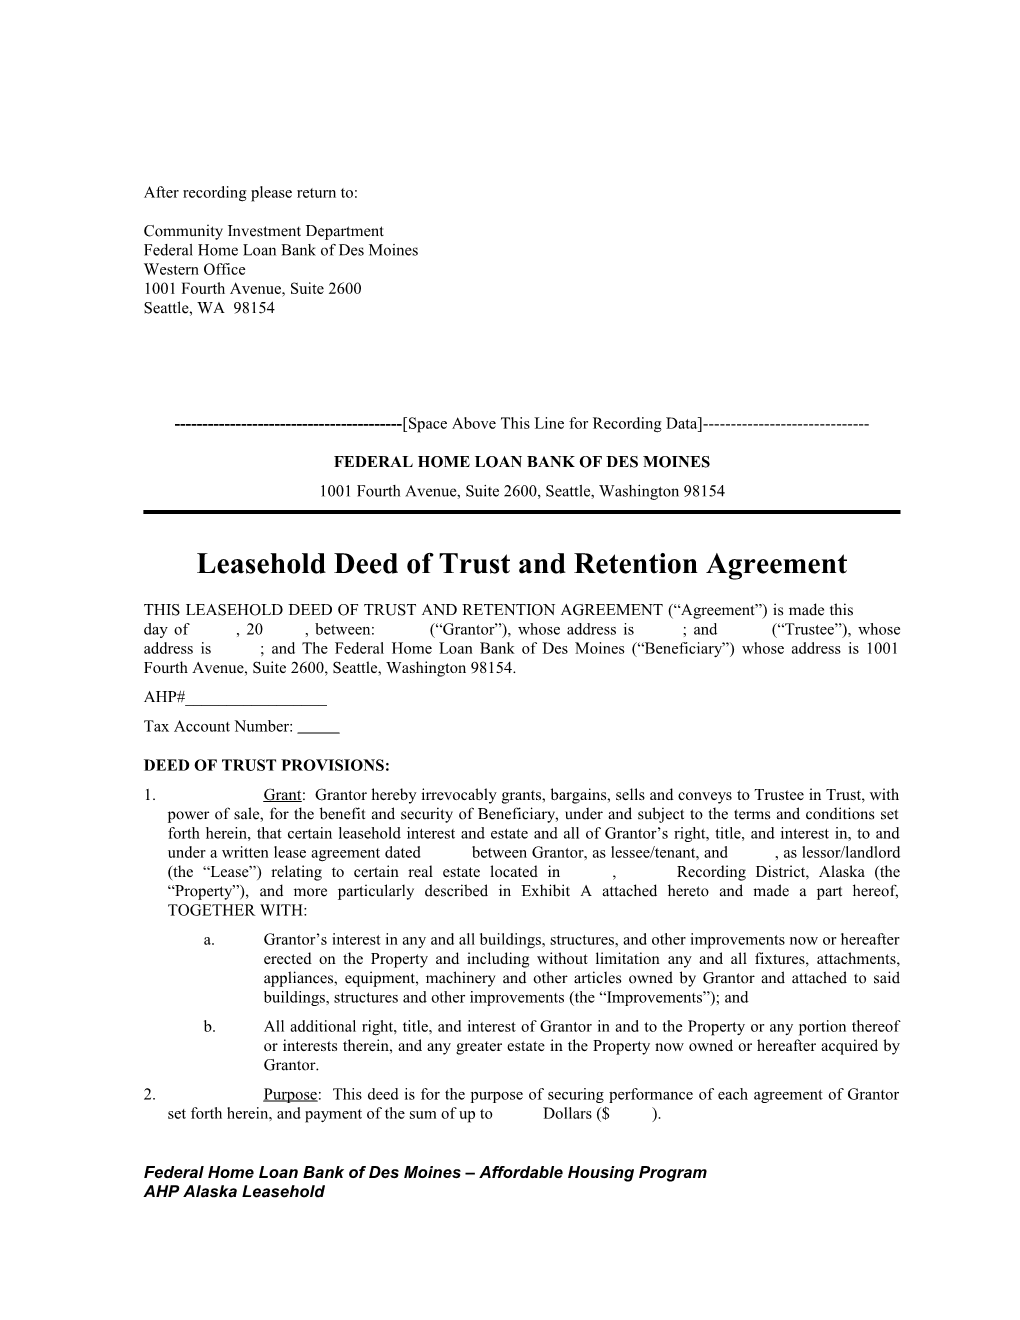 Deed of Trust and Retention Agreement